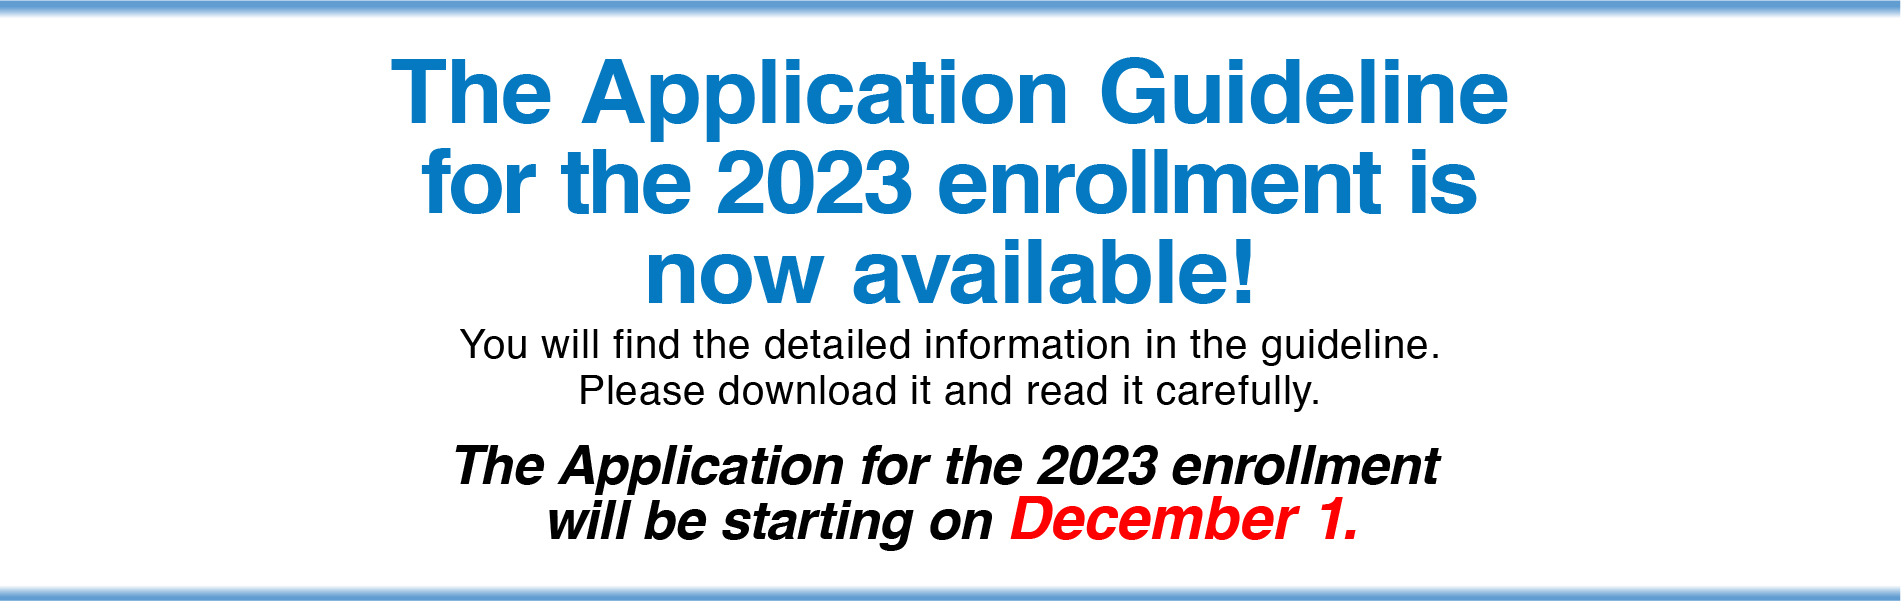 The Application Guideline for the 2023 enrollment is now available!